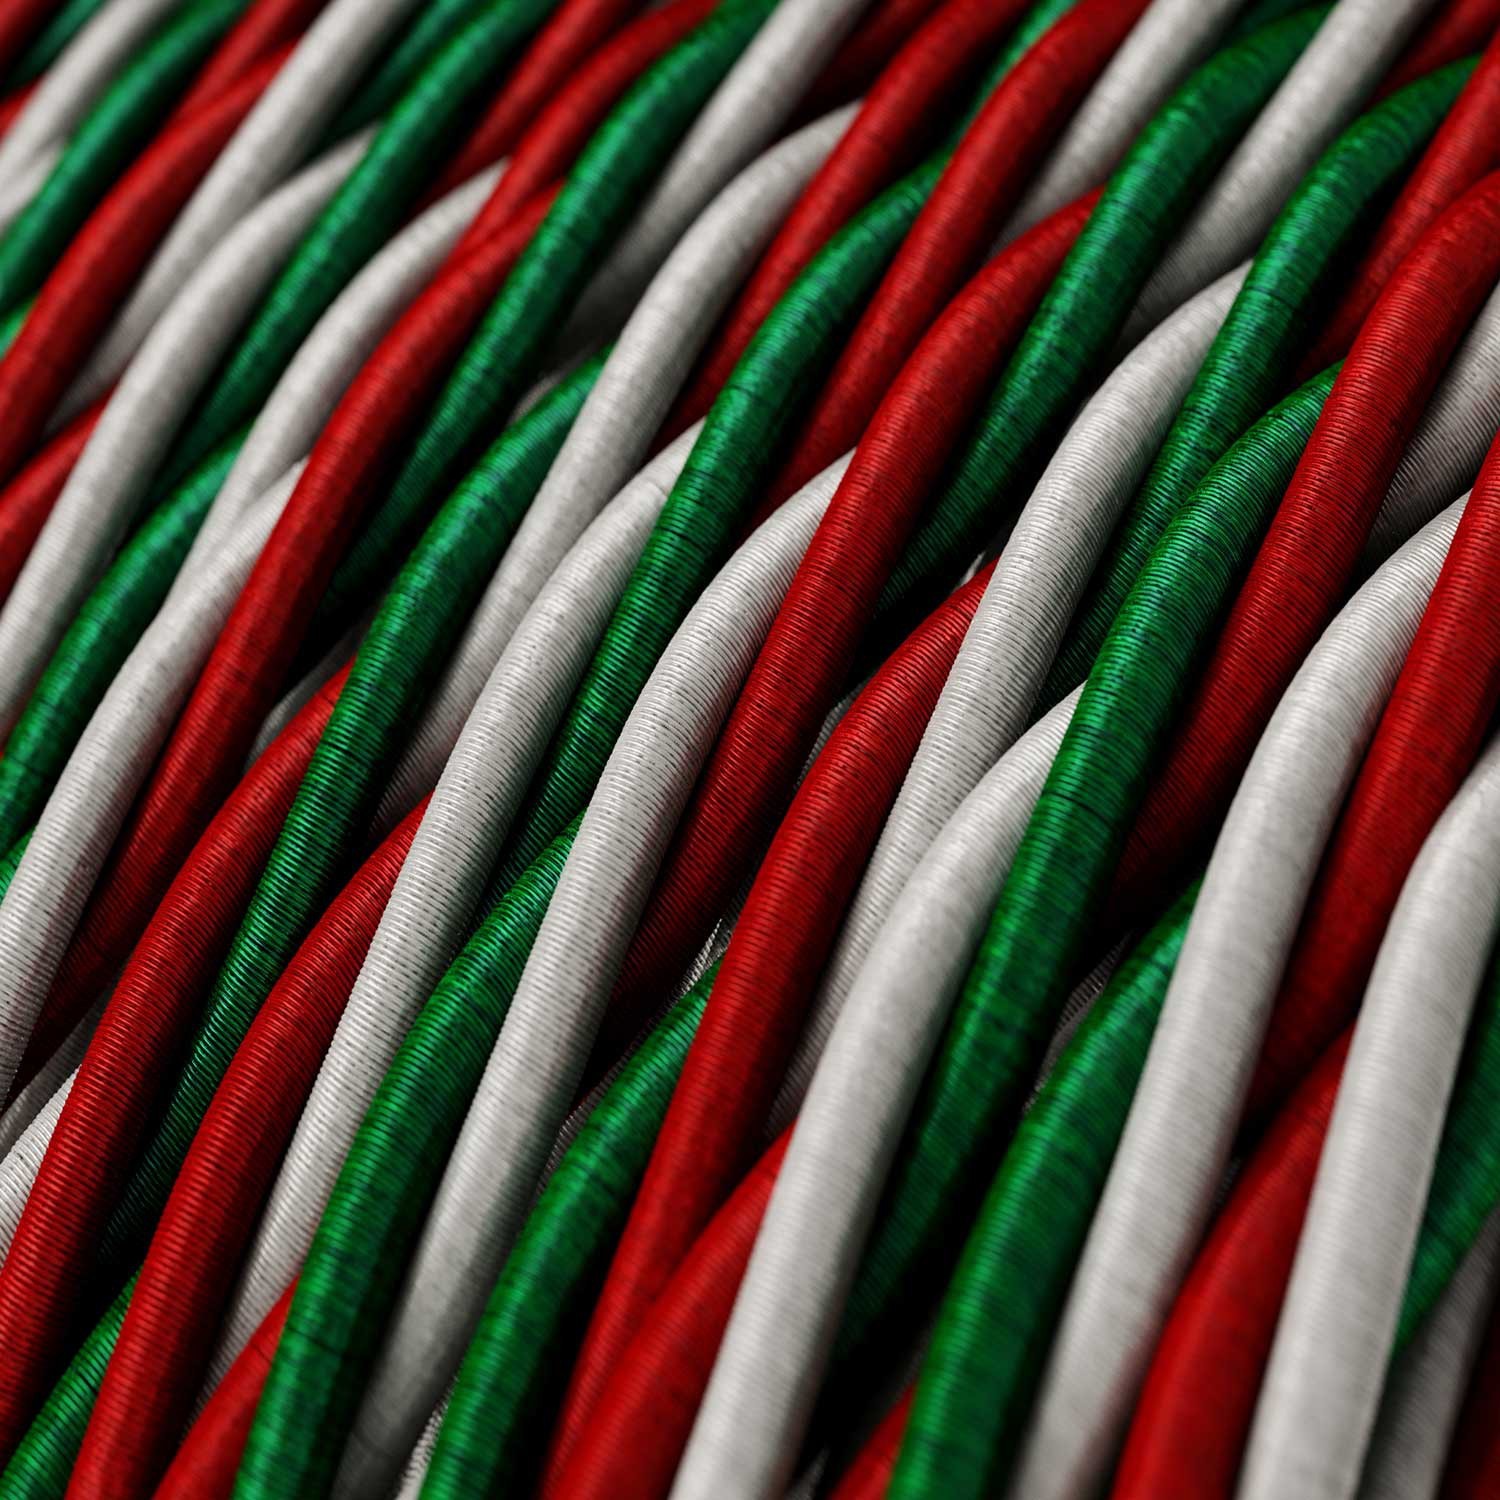 Twisted Electric Cable covered by Rayon fabric “Italy”